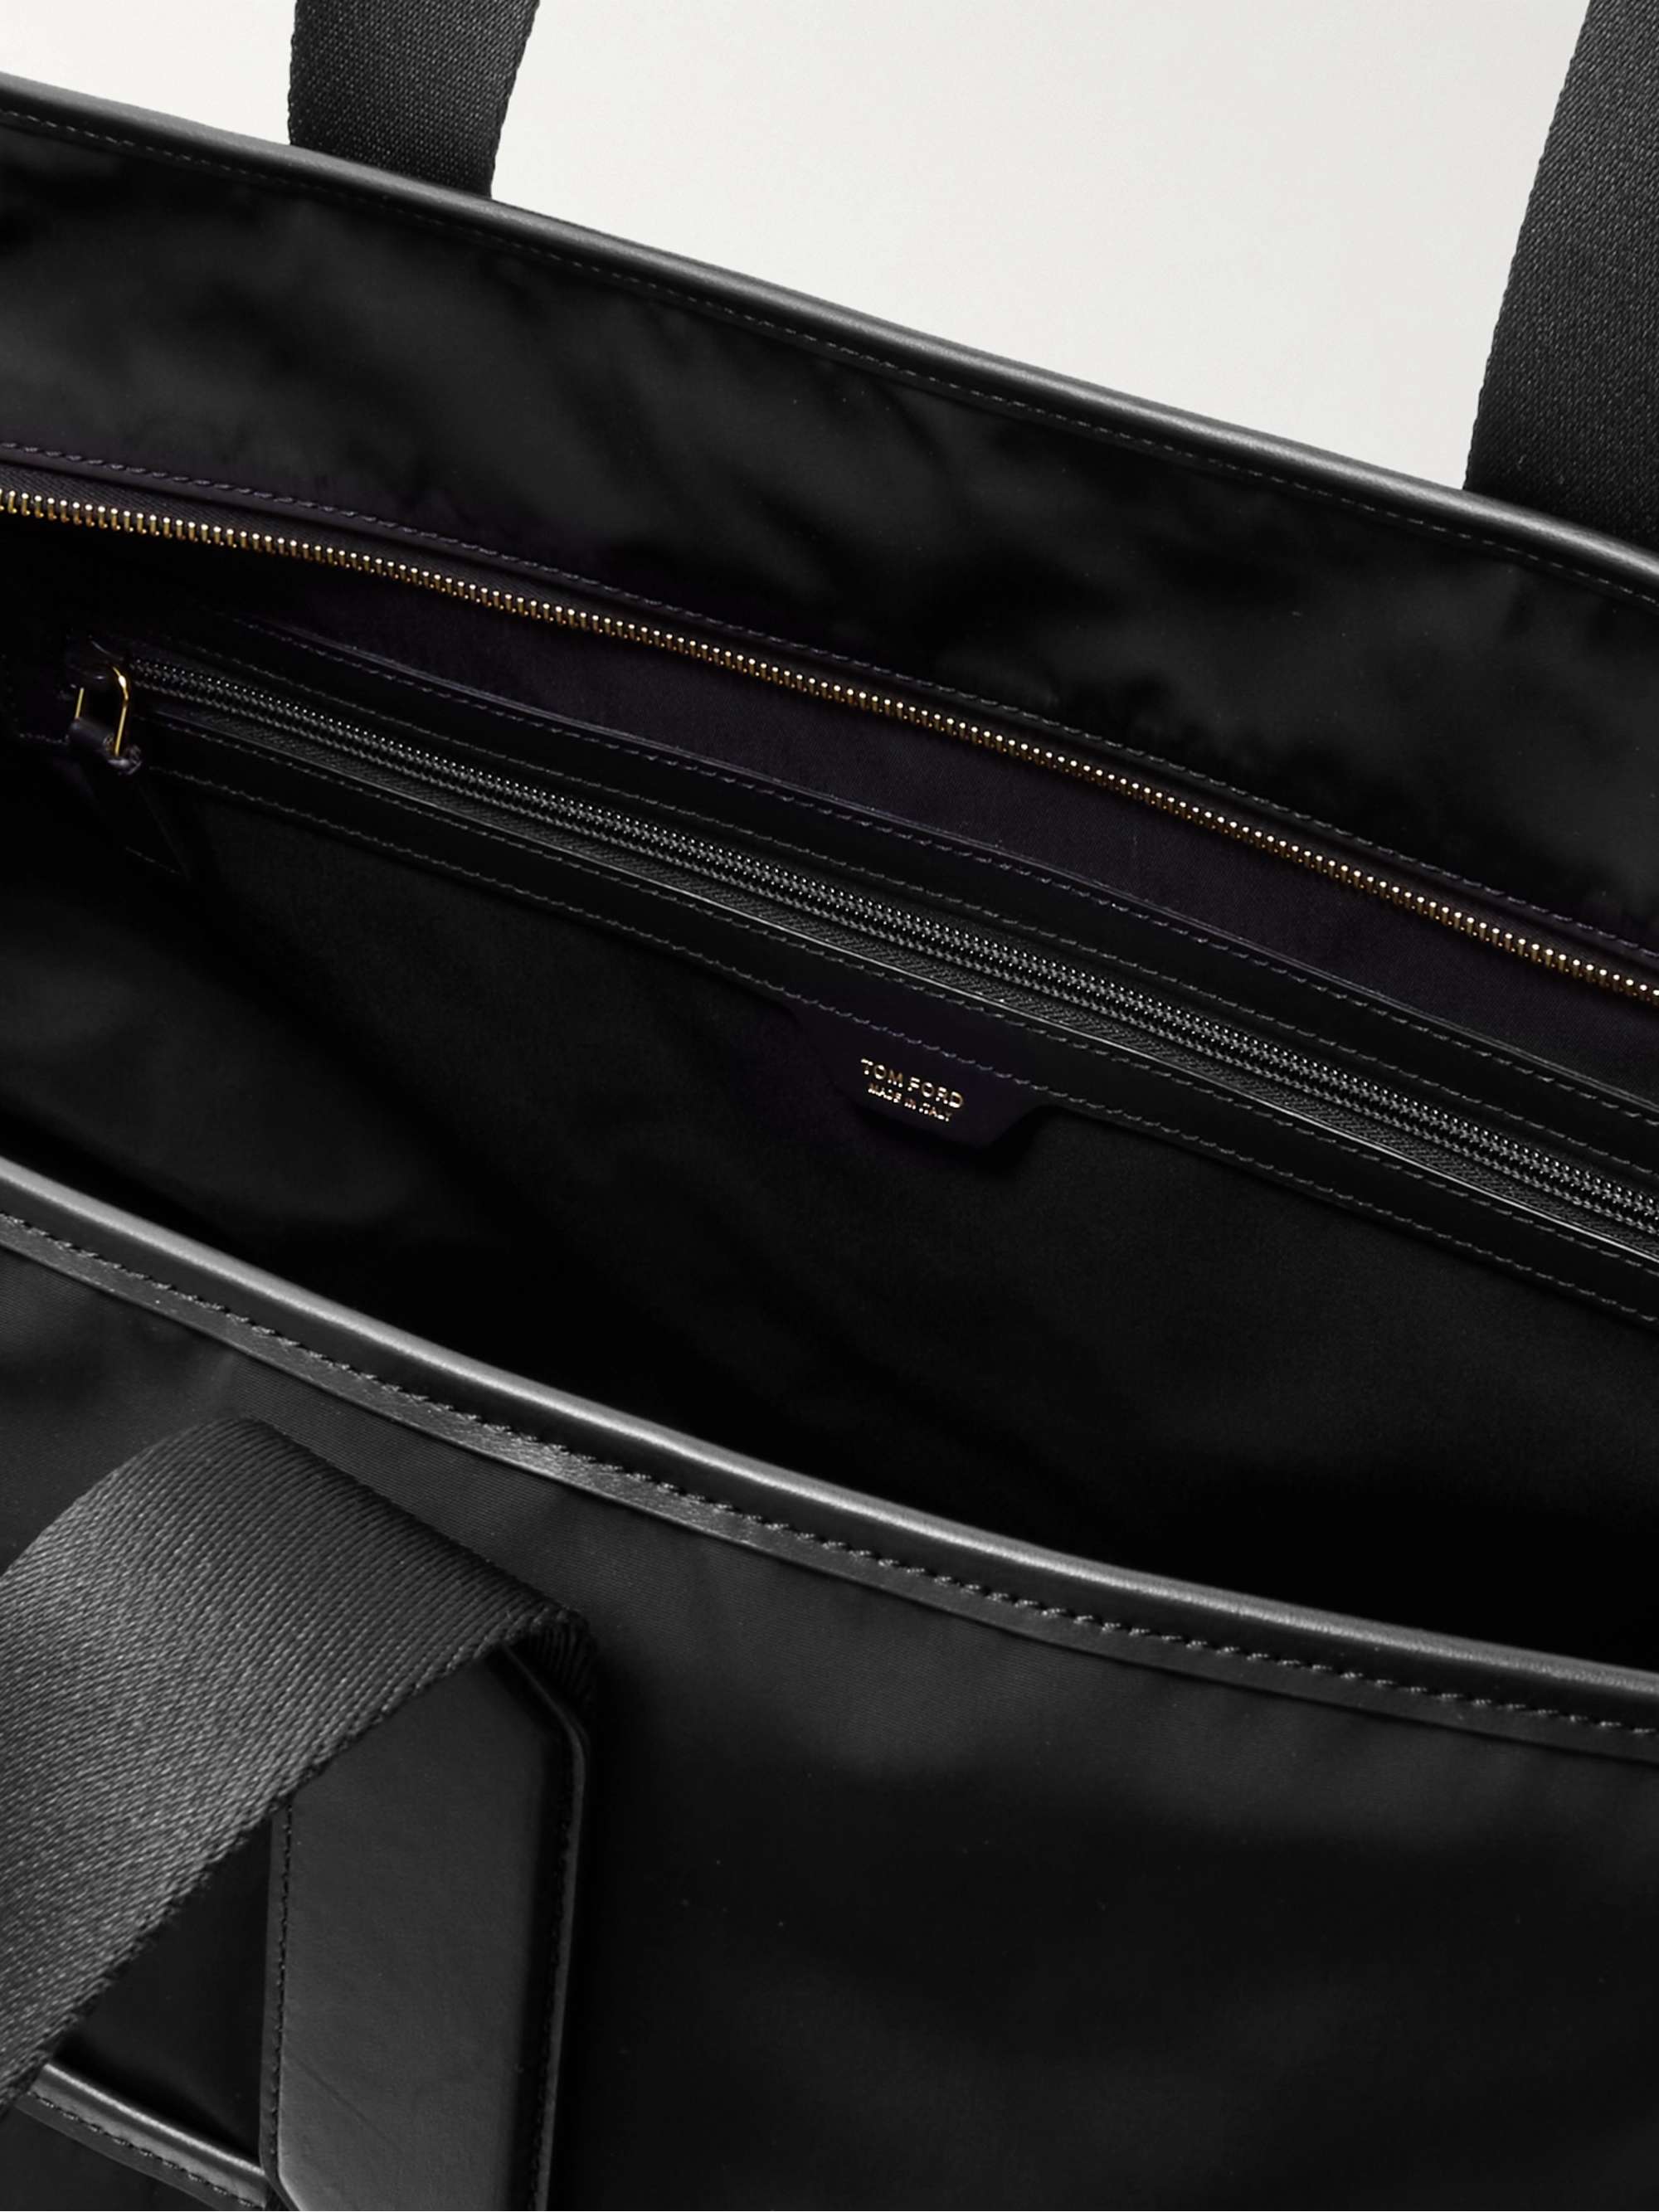 TOM FORD Leather-Trimmed Recycled Nylon Tote Bag